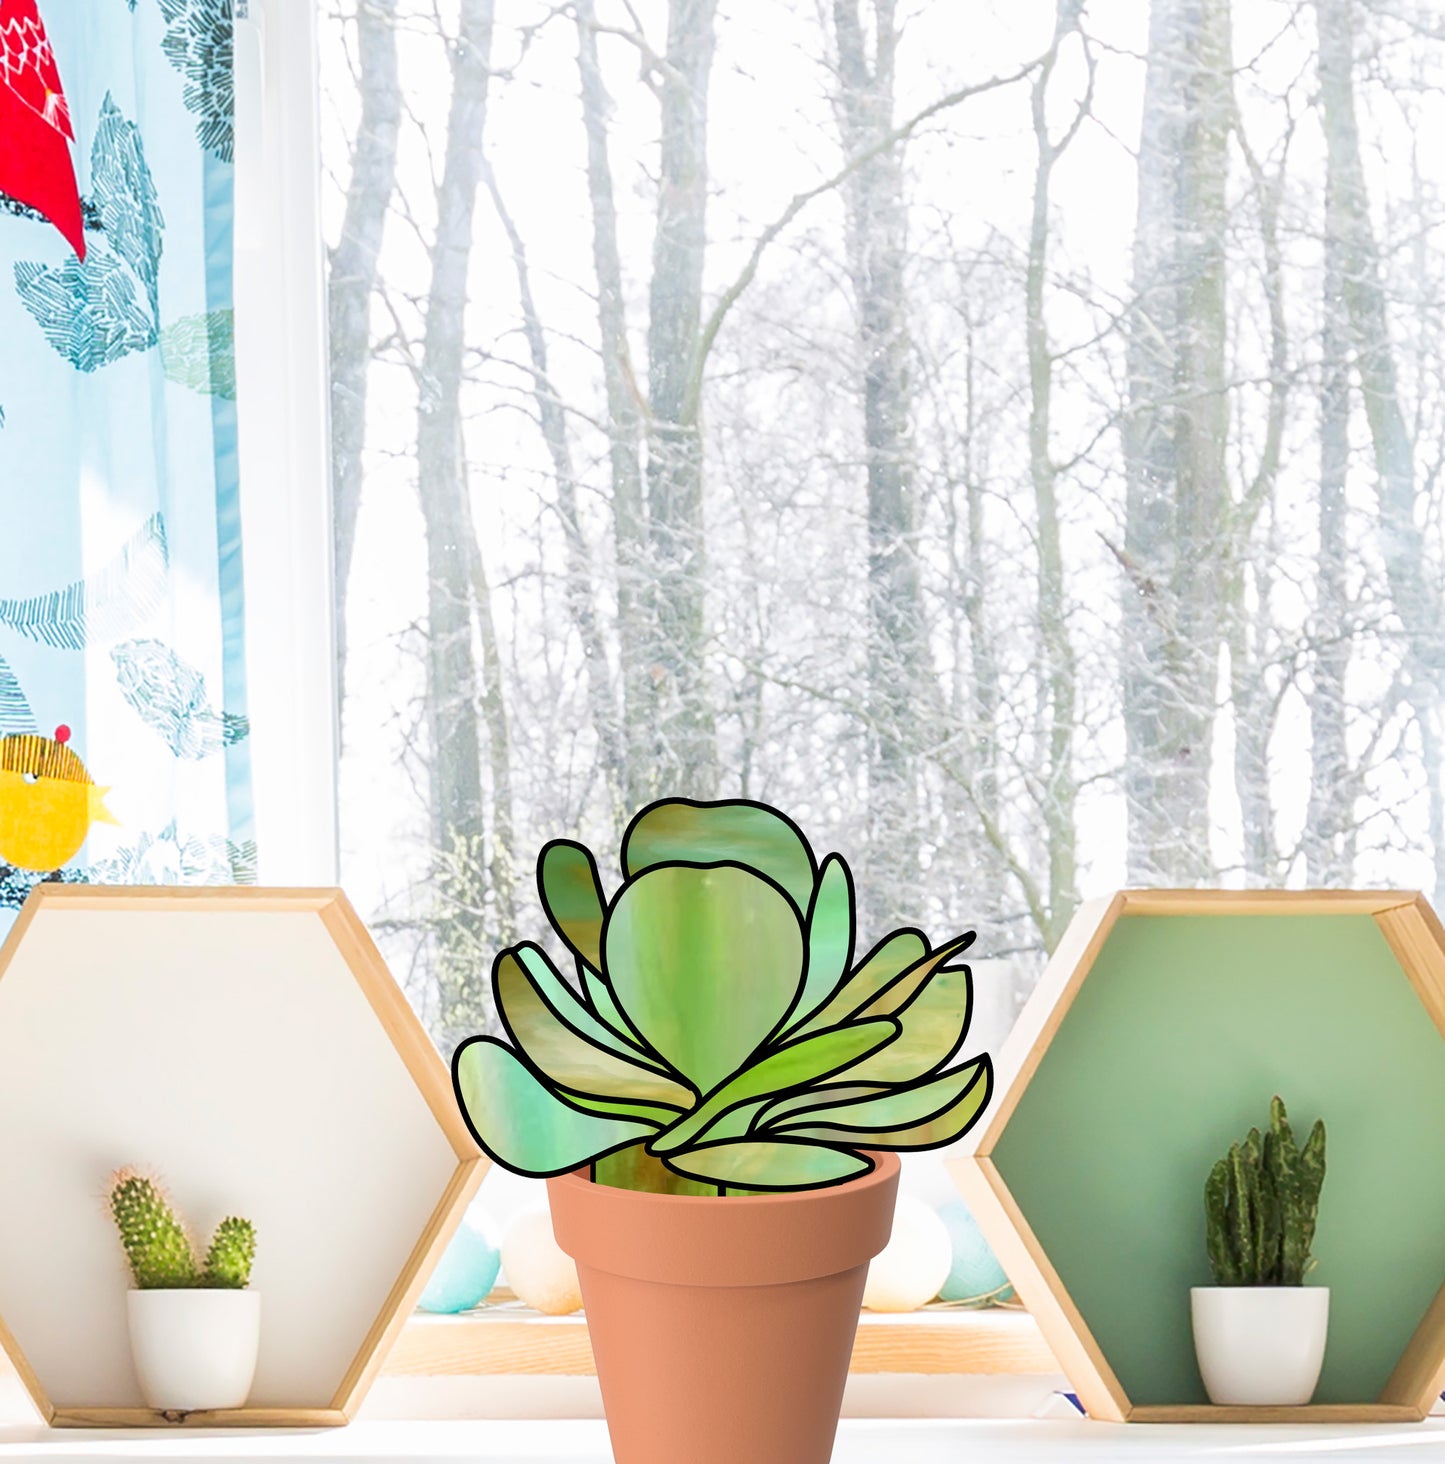 Original stained glass pattern for a kalanchoe "paddle plant" succulent plant stem agave, instant PDF download, shown on windowsill with winter background